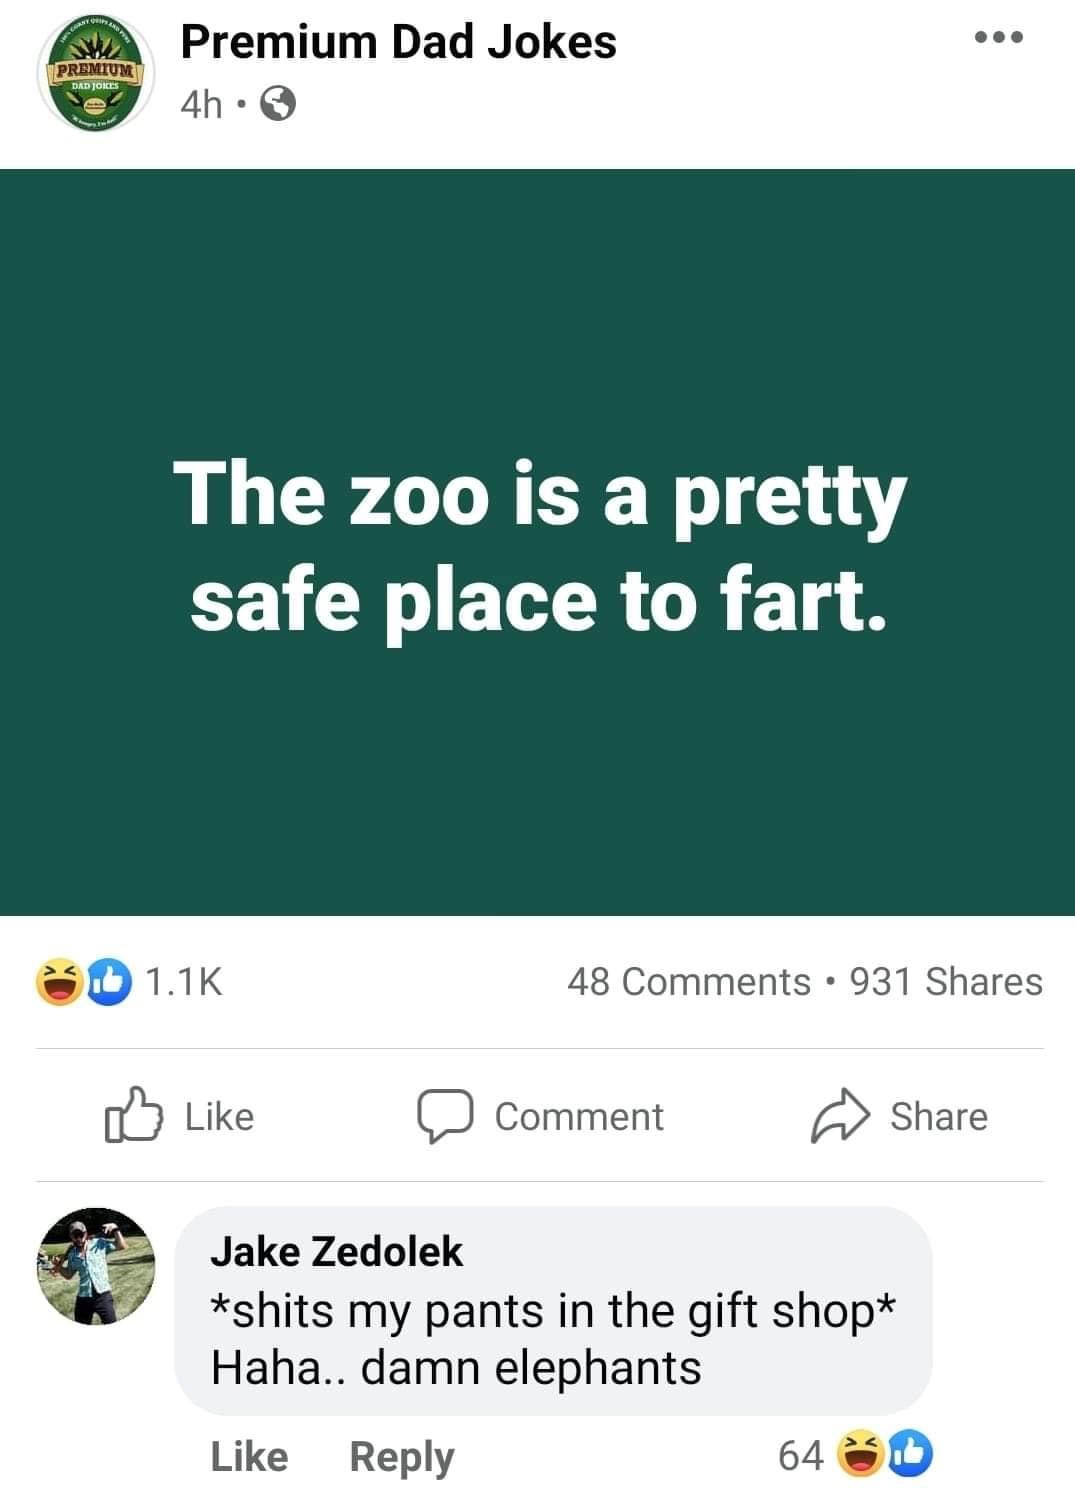 screenshot - Premium Dad Jokes Premium Dad Joices 4h The zoo is a pretty safe place to fart. . 48 931 Comment Jake Zedolek shits my pants in the gift shop Haha.. damn elephants 64